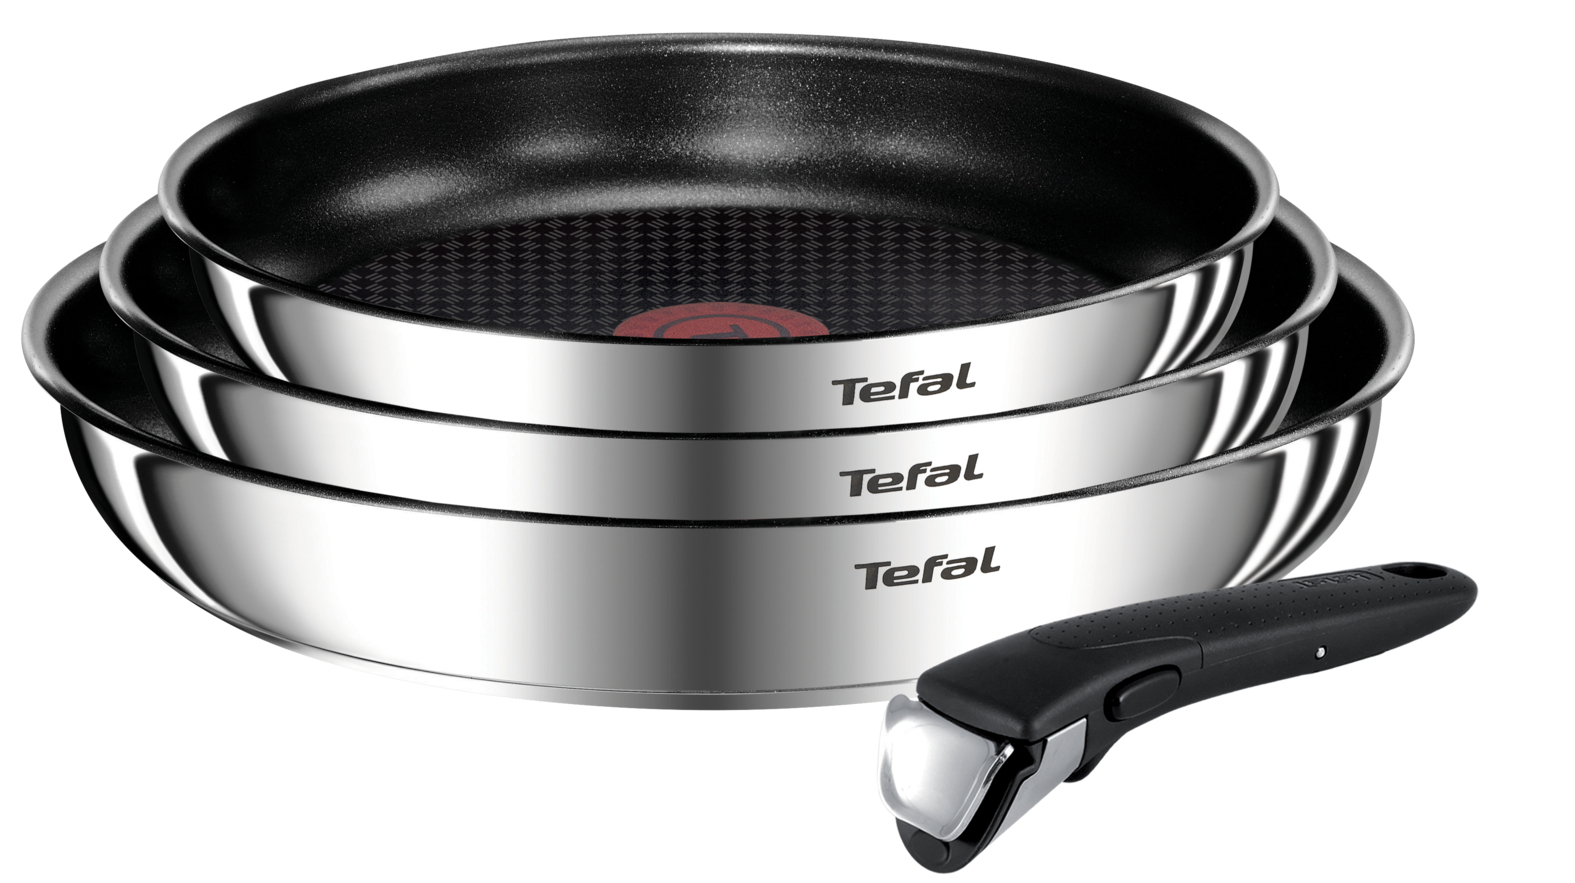 Tefal - Set of cookware 4 pcs INGENIO EMOTION stainless steel